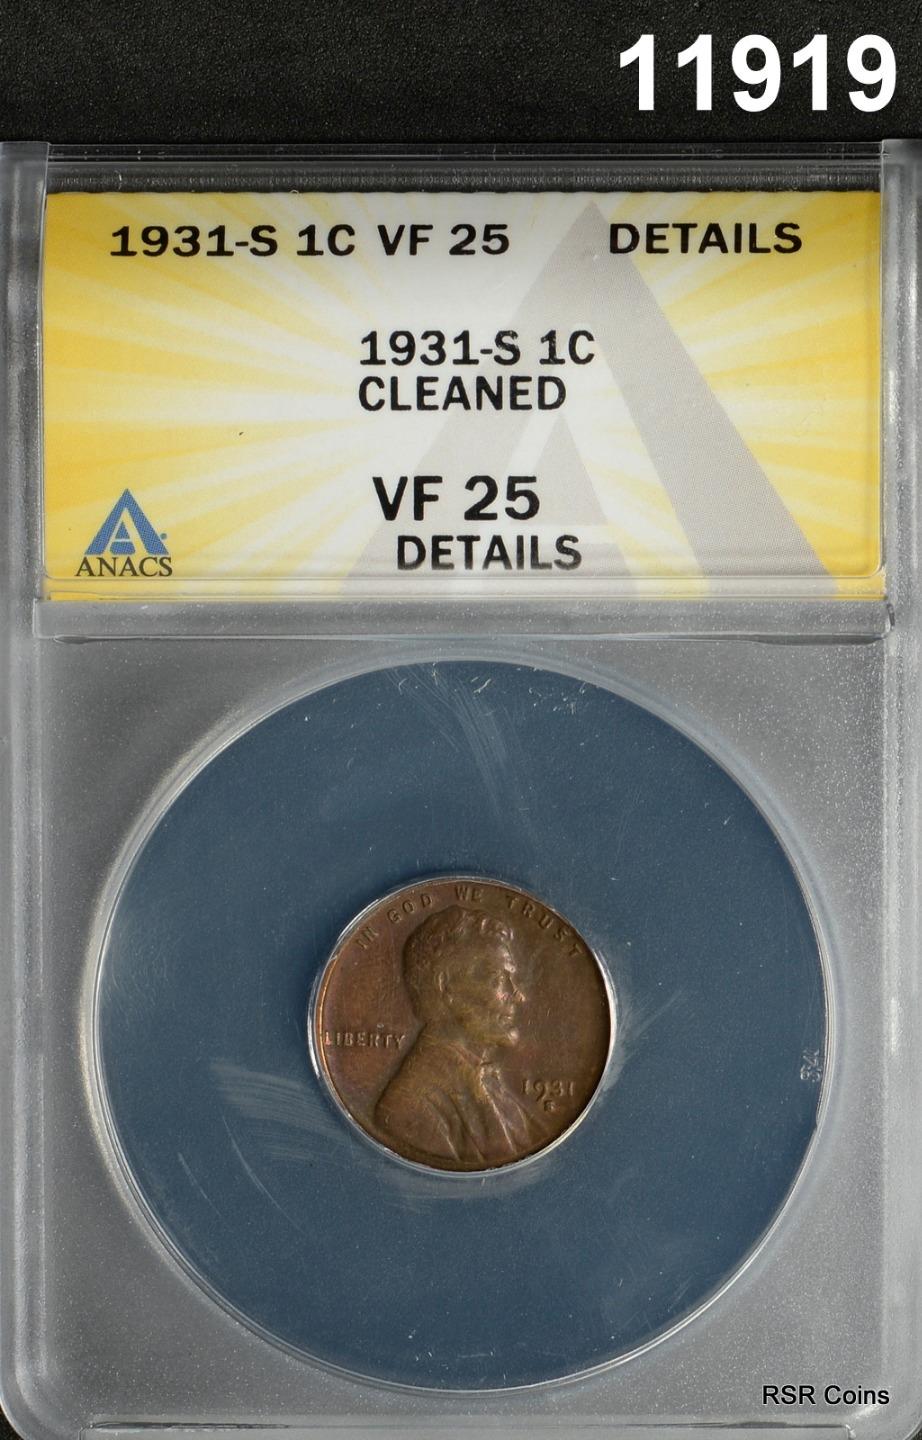 1931 S LINCOLN CENT ANACS CERTIFIED VF25 CLEANED #11919